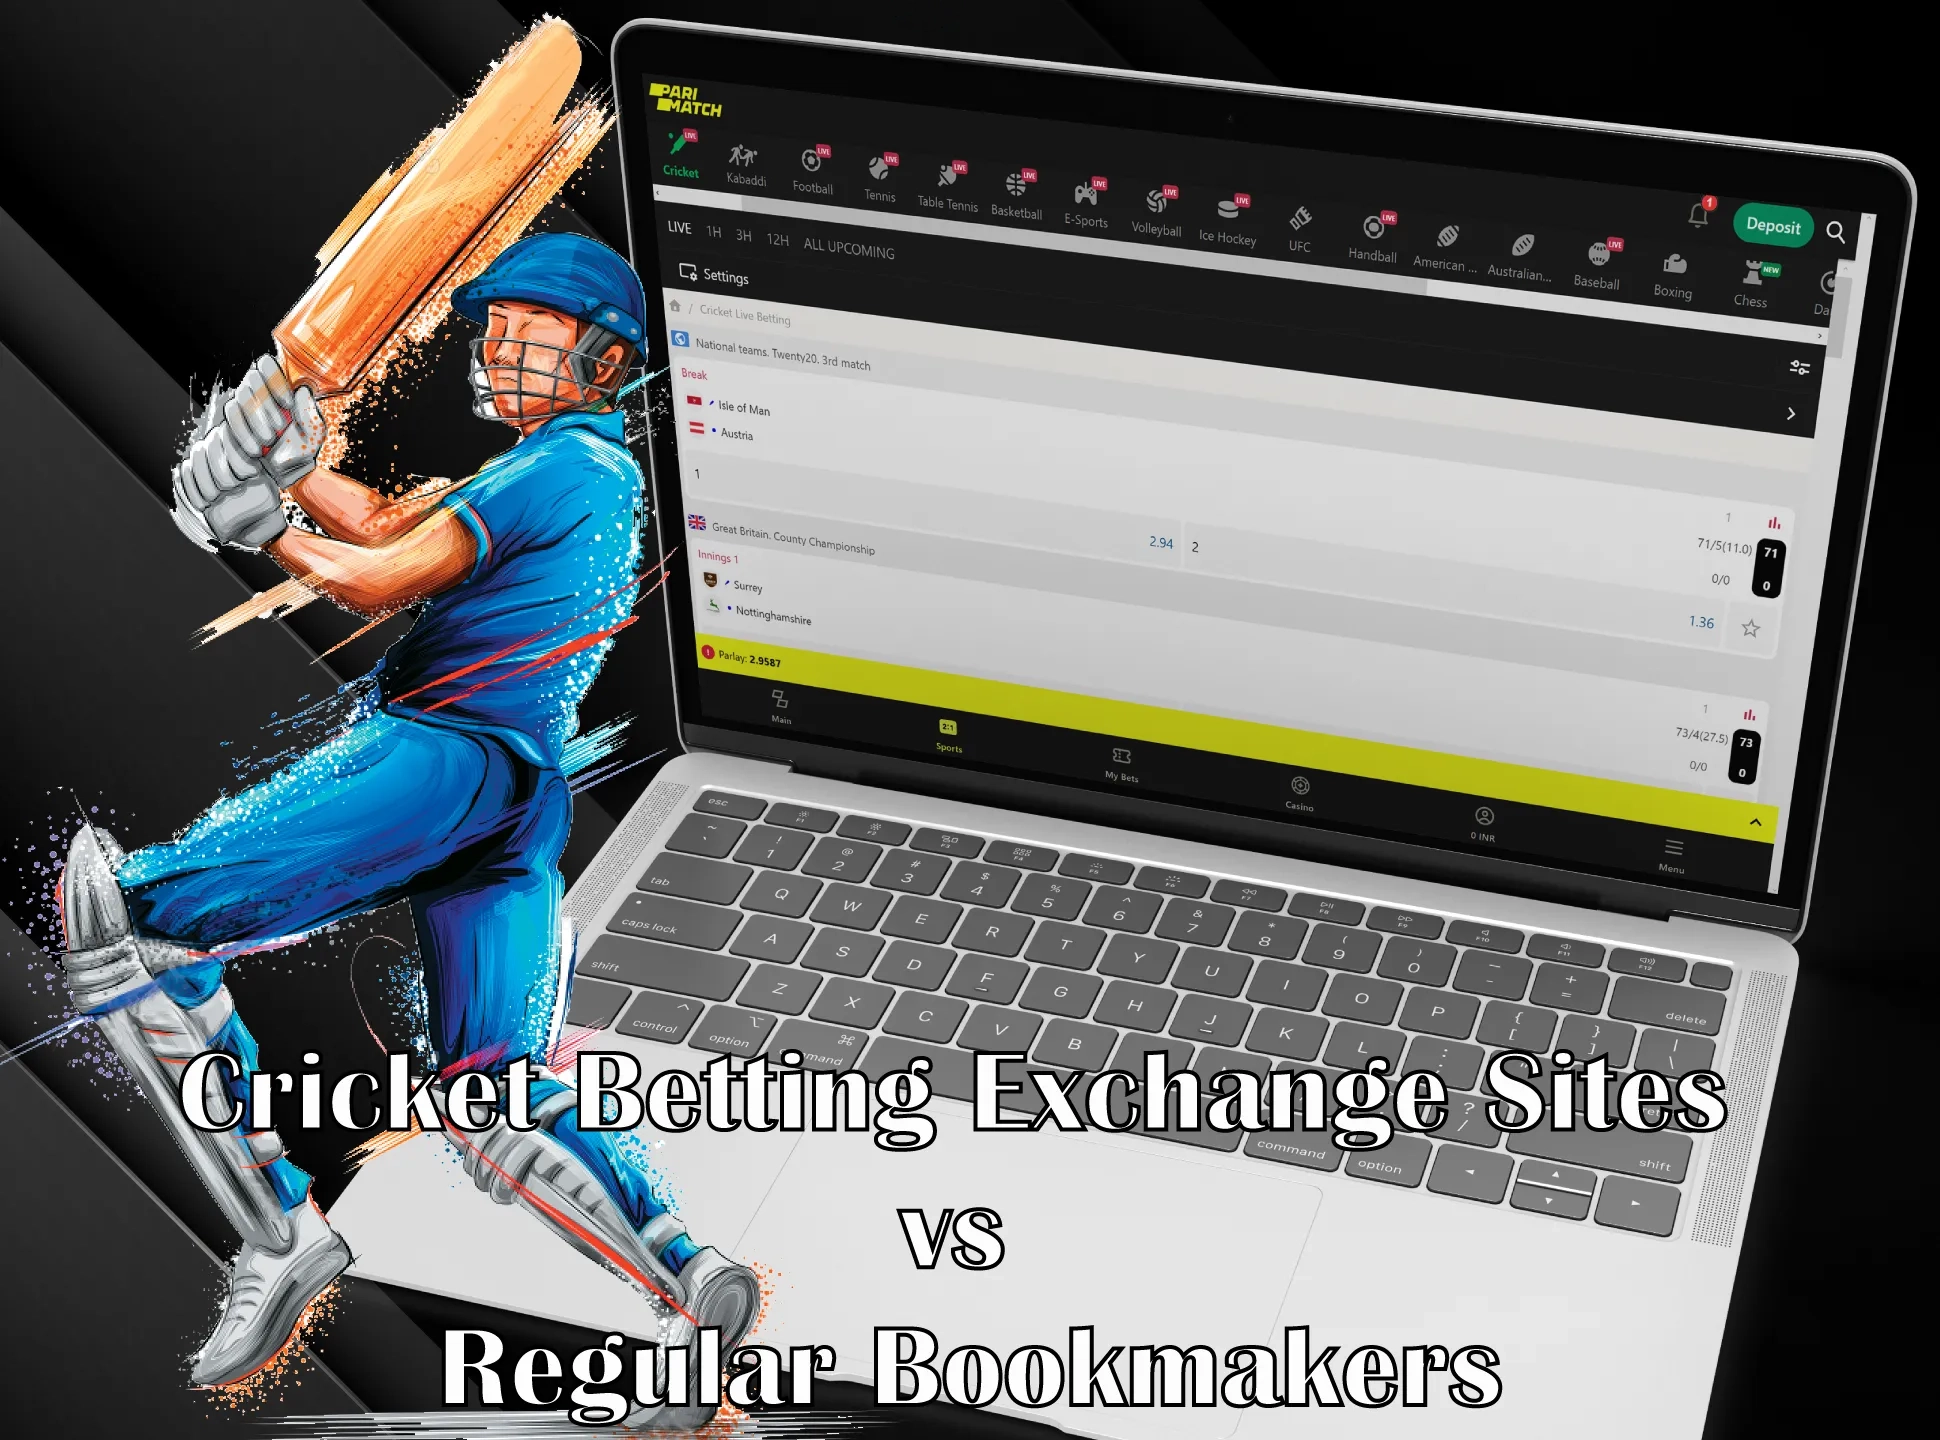 Learn about the advantages of cricket betting exchange sites over other bookmakers.